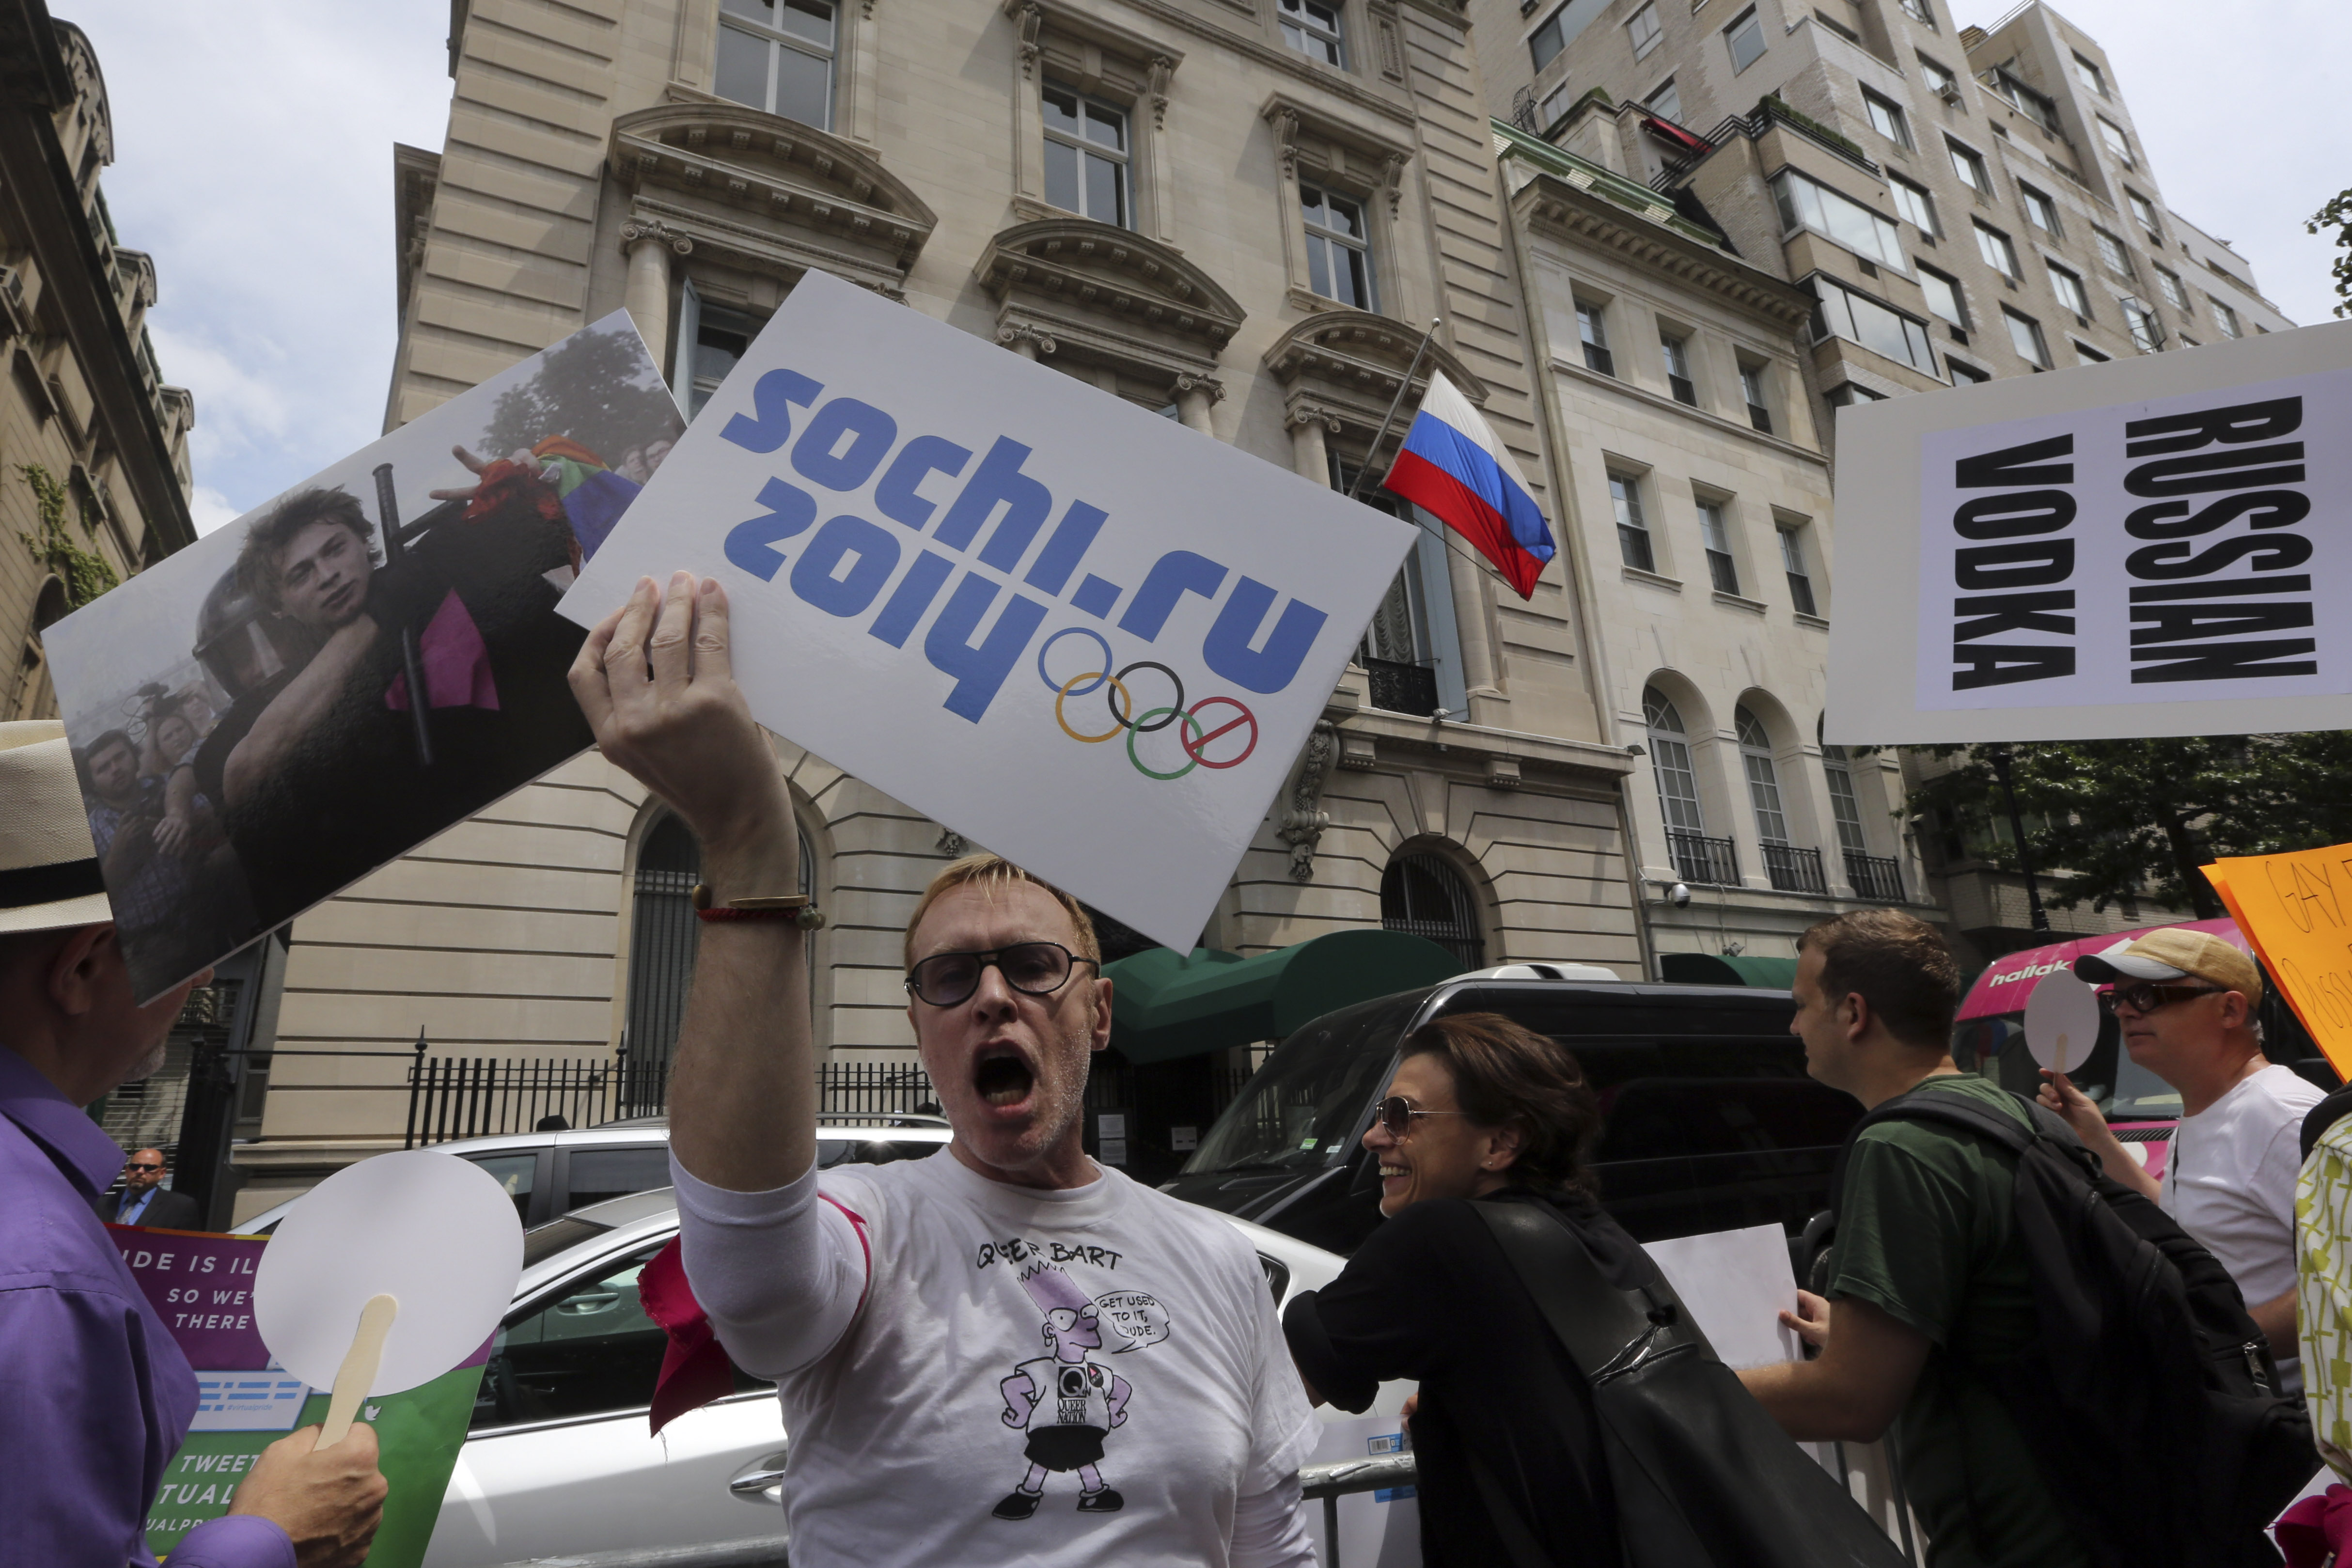 31 July 2013, United States. LGBT rights activist Ken Kidd demonstrates in front of the Russian consulate in New York.